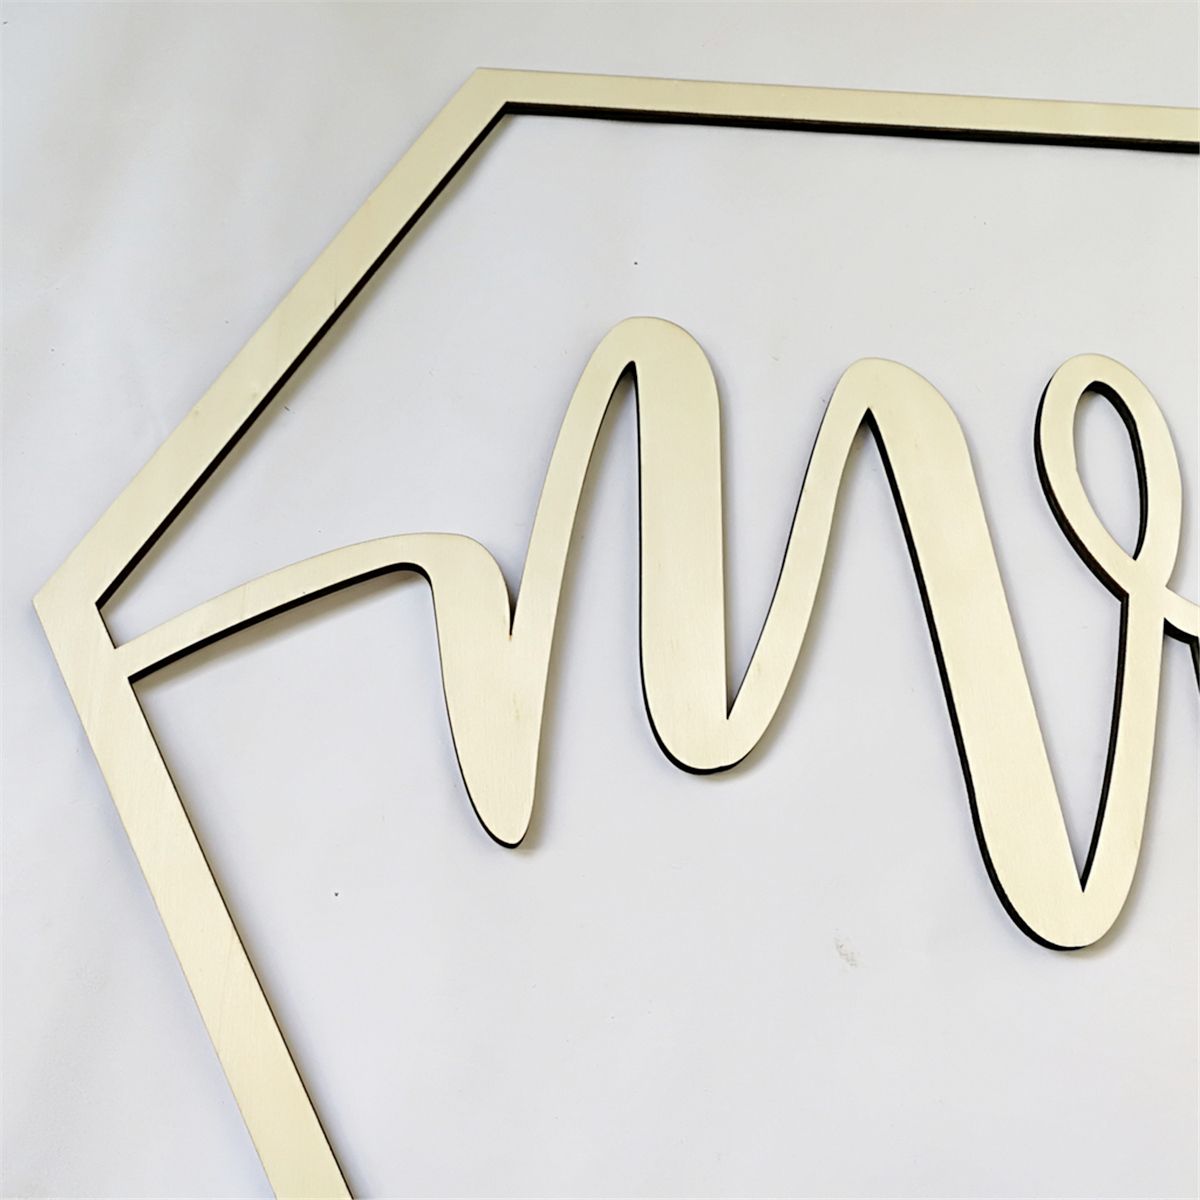 Mr-amp-Mrs-Wedding-Bride-Groom-Chair-Signs-Set-Hanging-Wooden-Party-Decorations-1468289